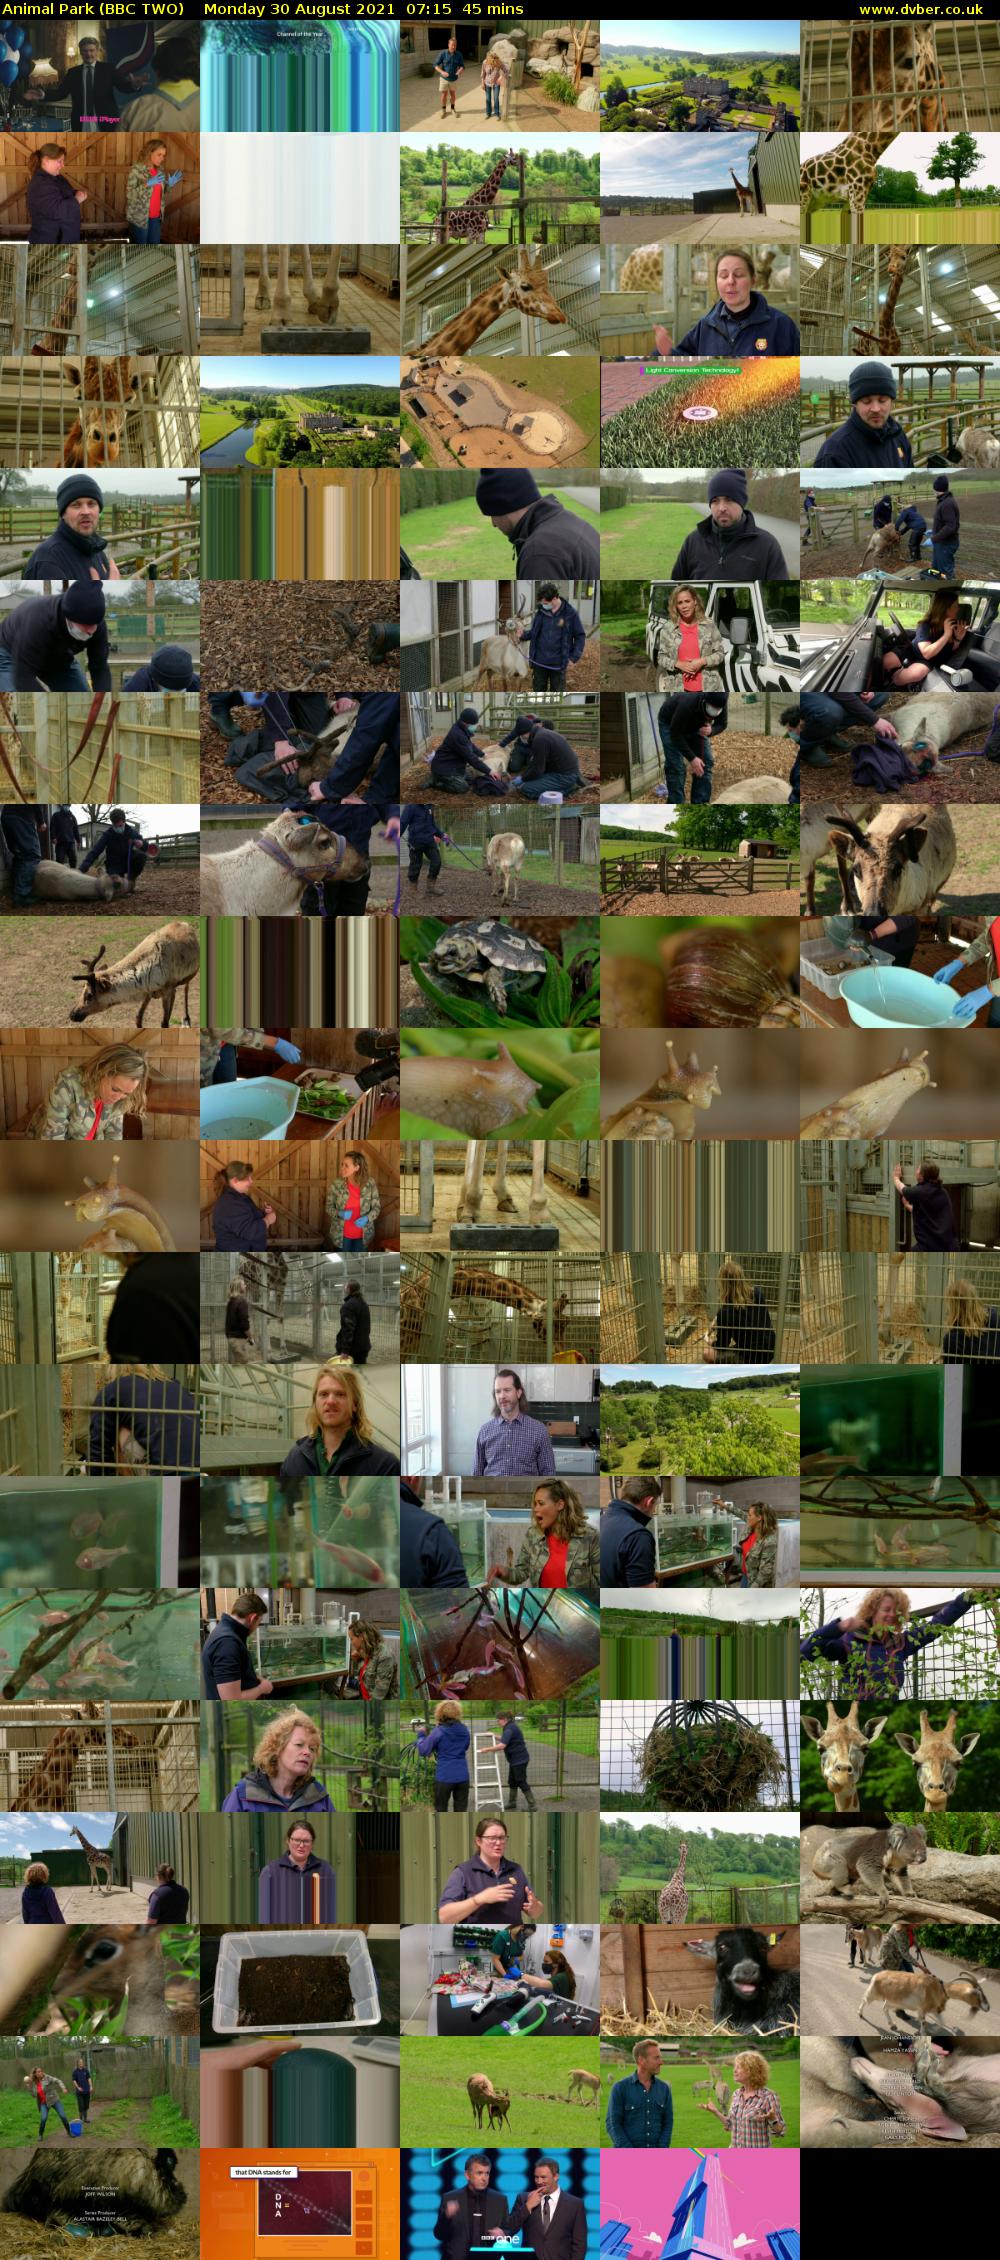 Animal Park (BBC TWO) Monday 30 August 2021 07:15 - 08:00